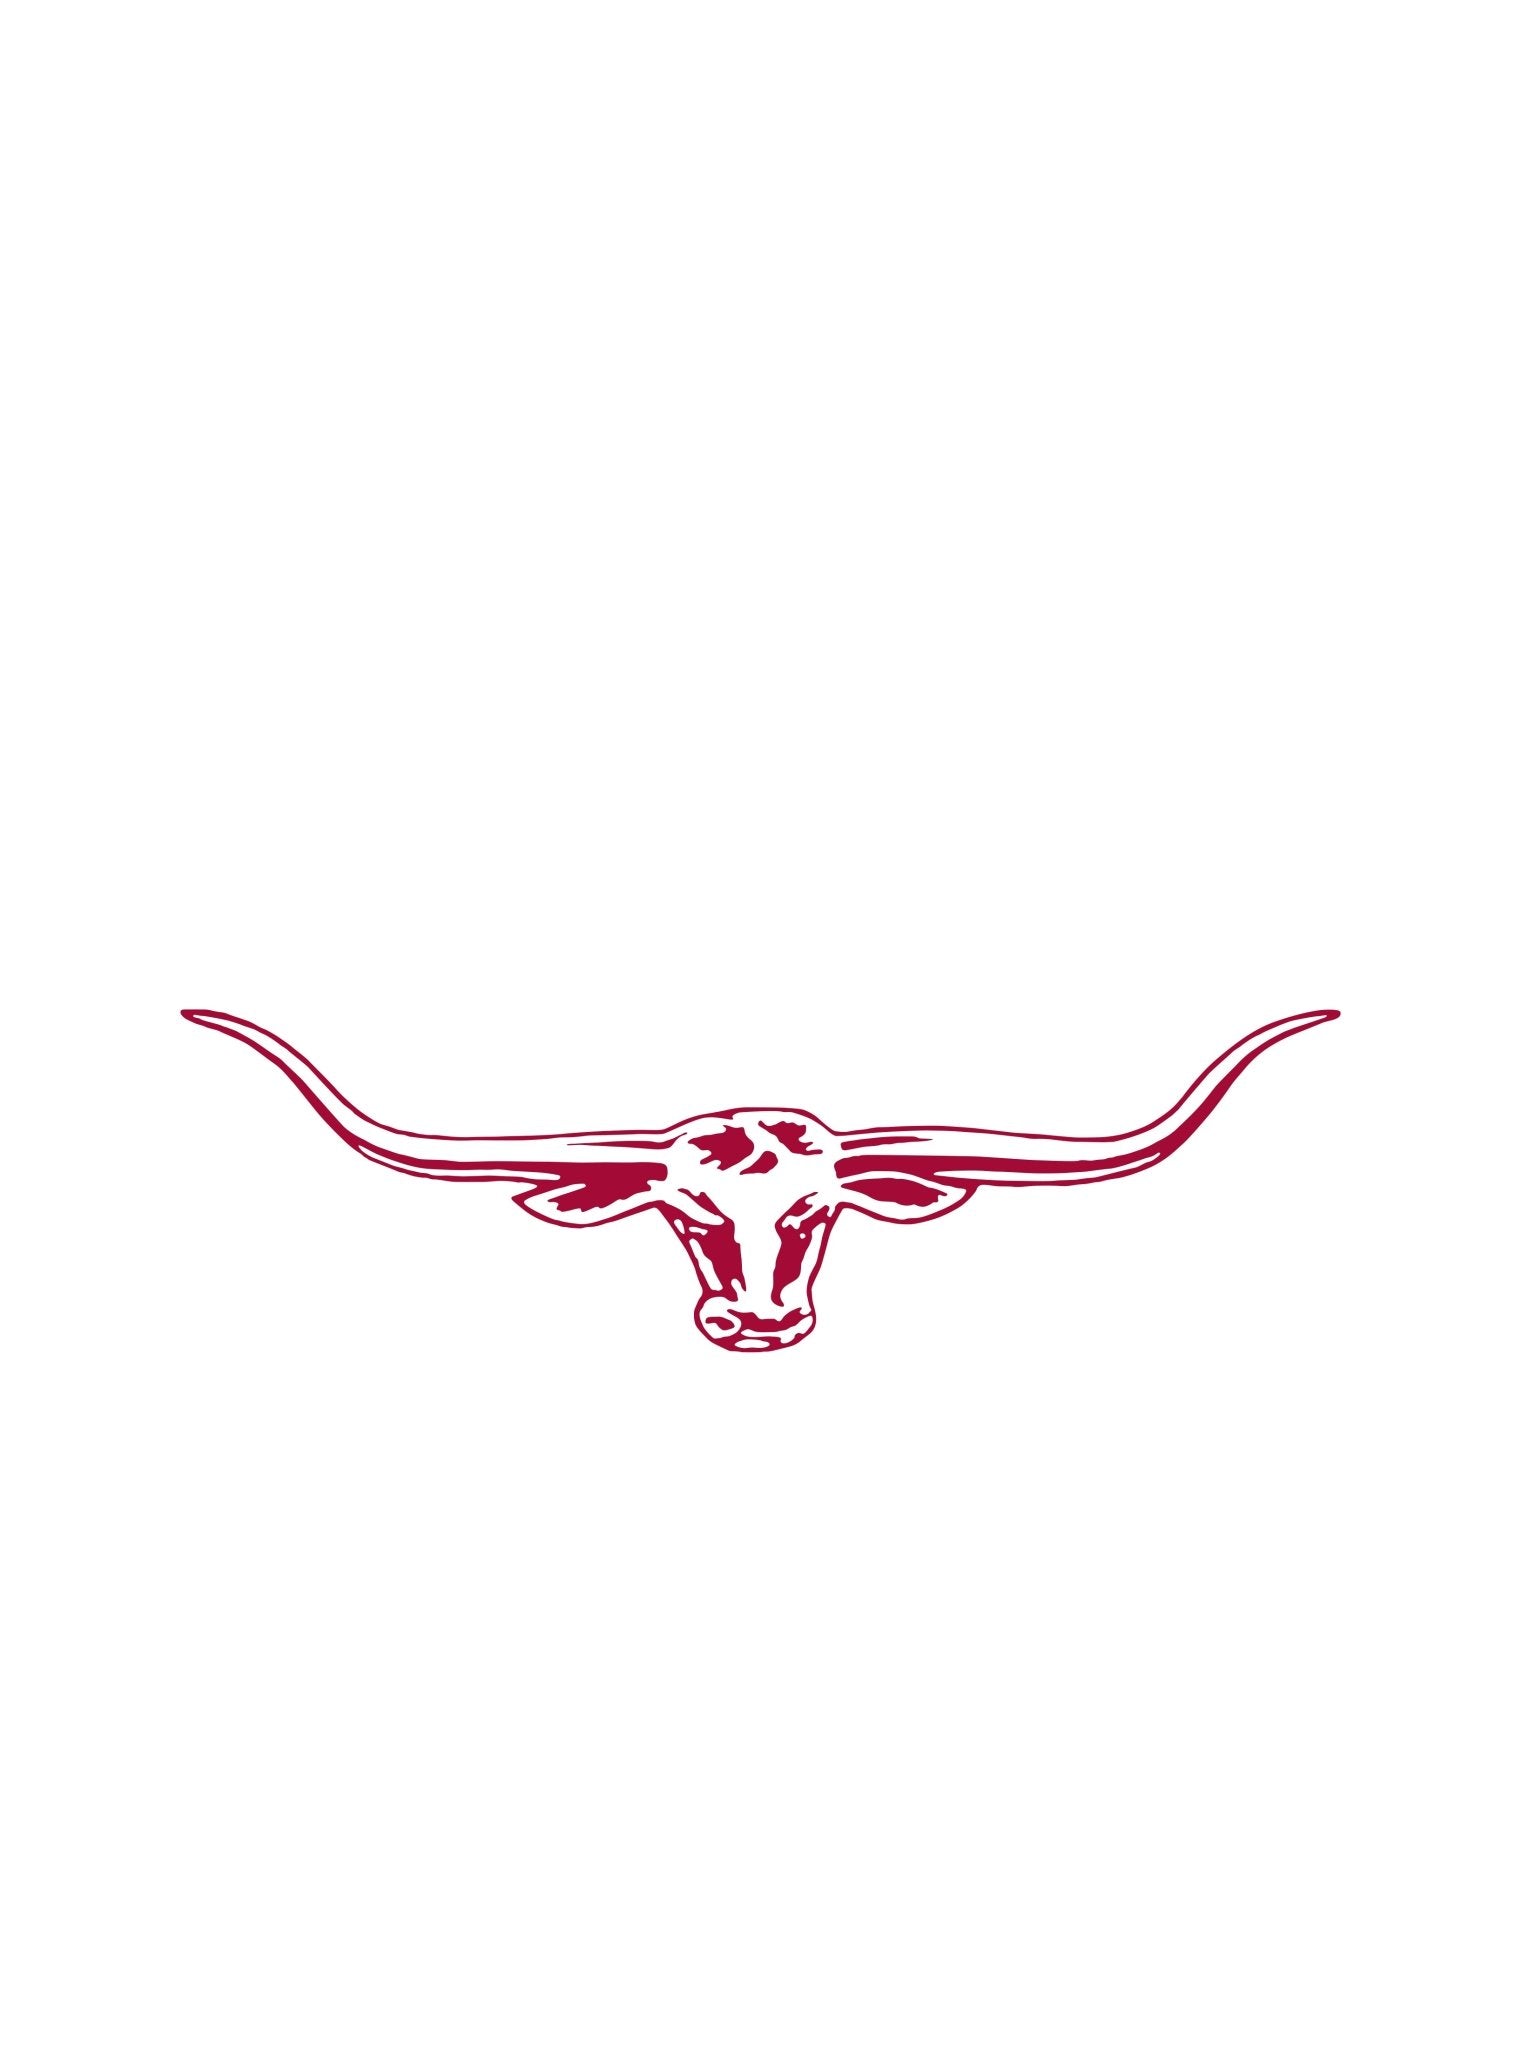 RMW Longhorn Decal - Thomson's Suits Ltd - Red - - 28162